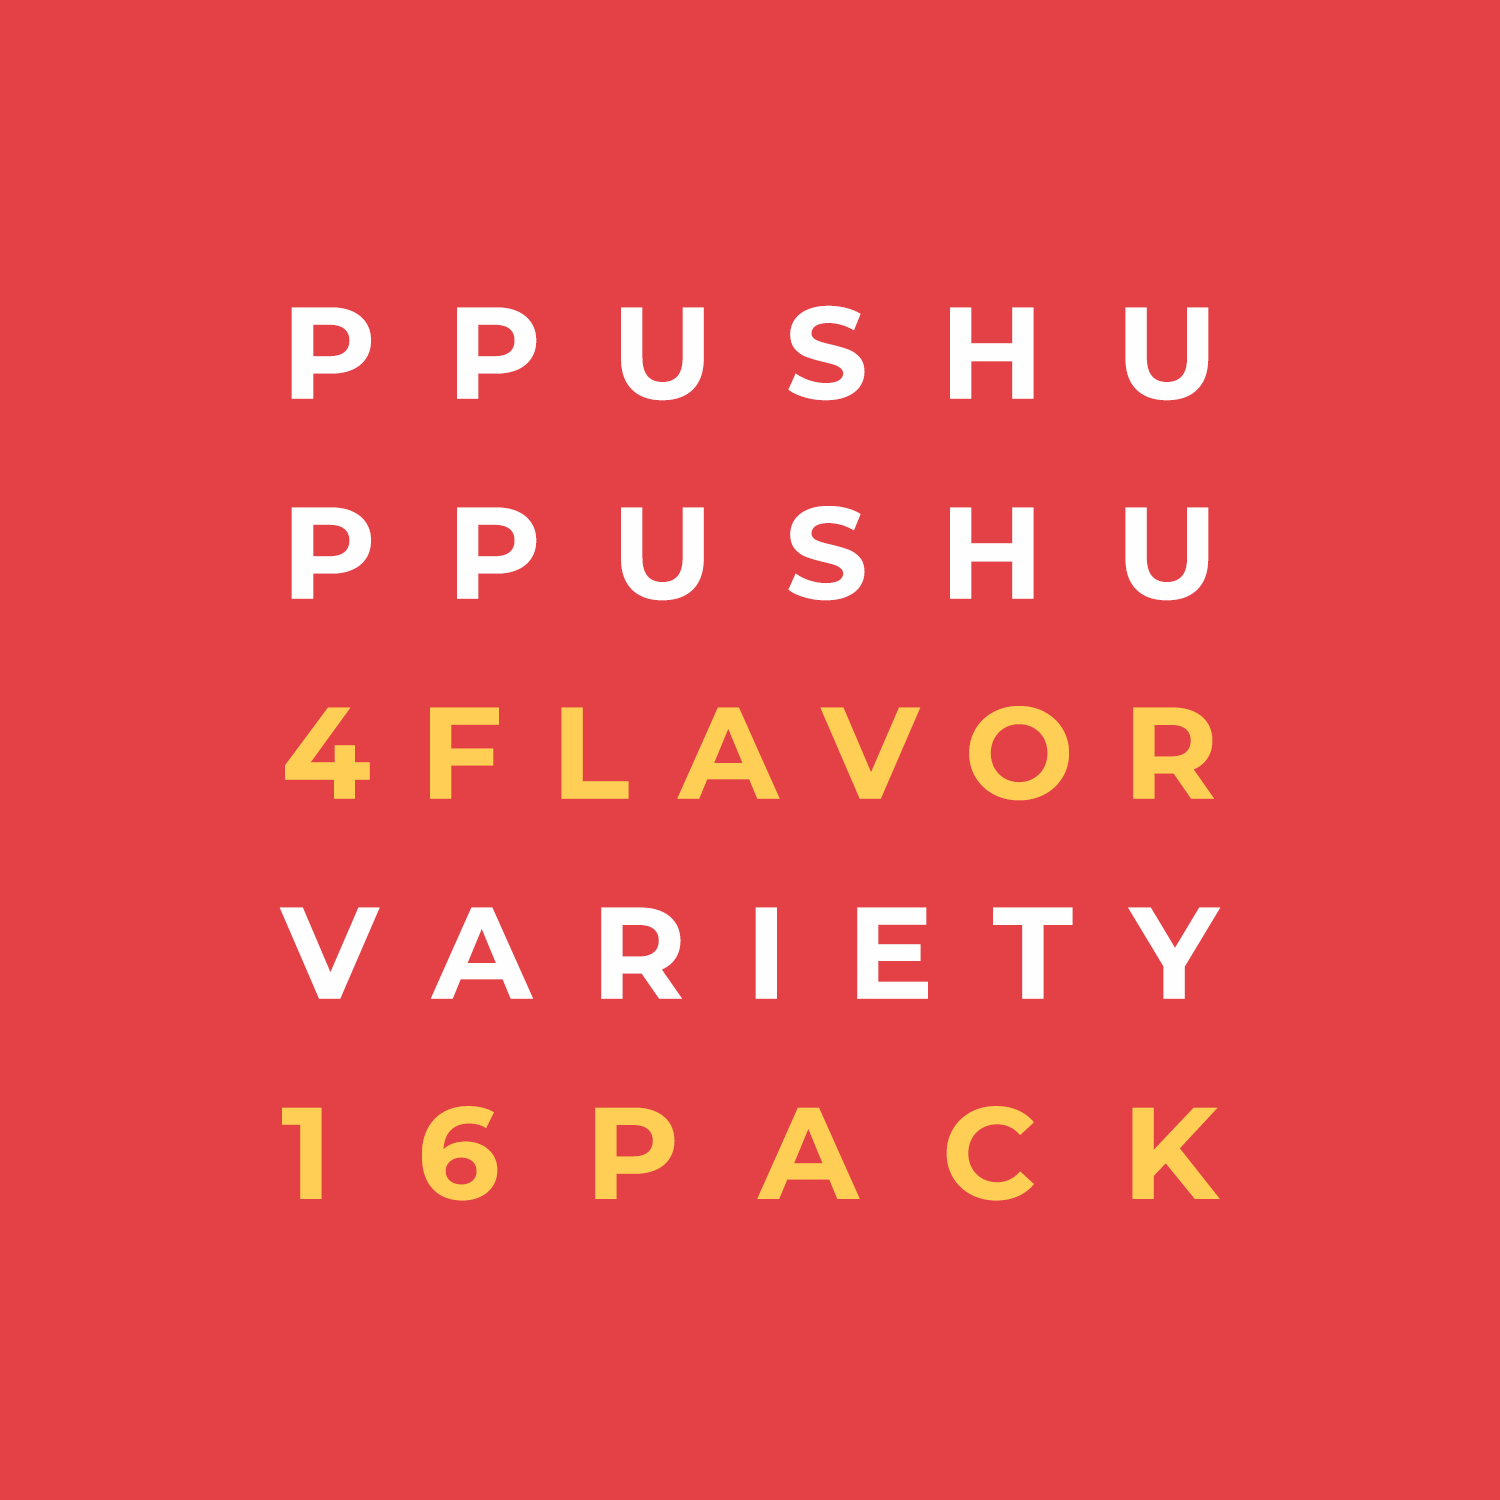 PPUSHU PPUSHU NOODLE SNACK 4-FLAVOR VARIETY [16PK]